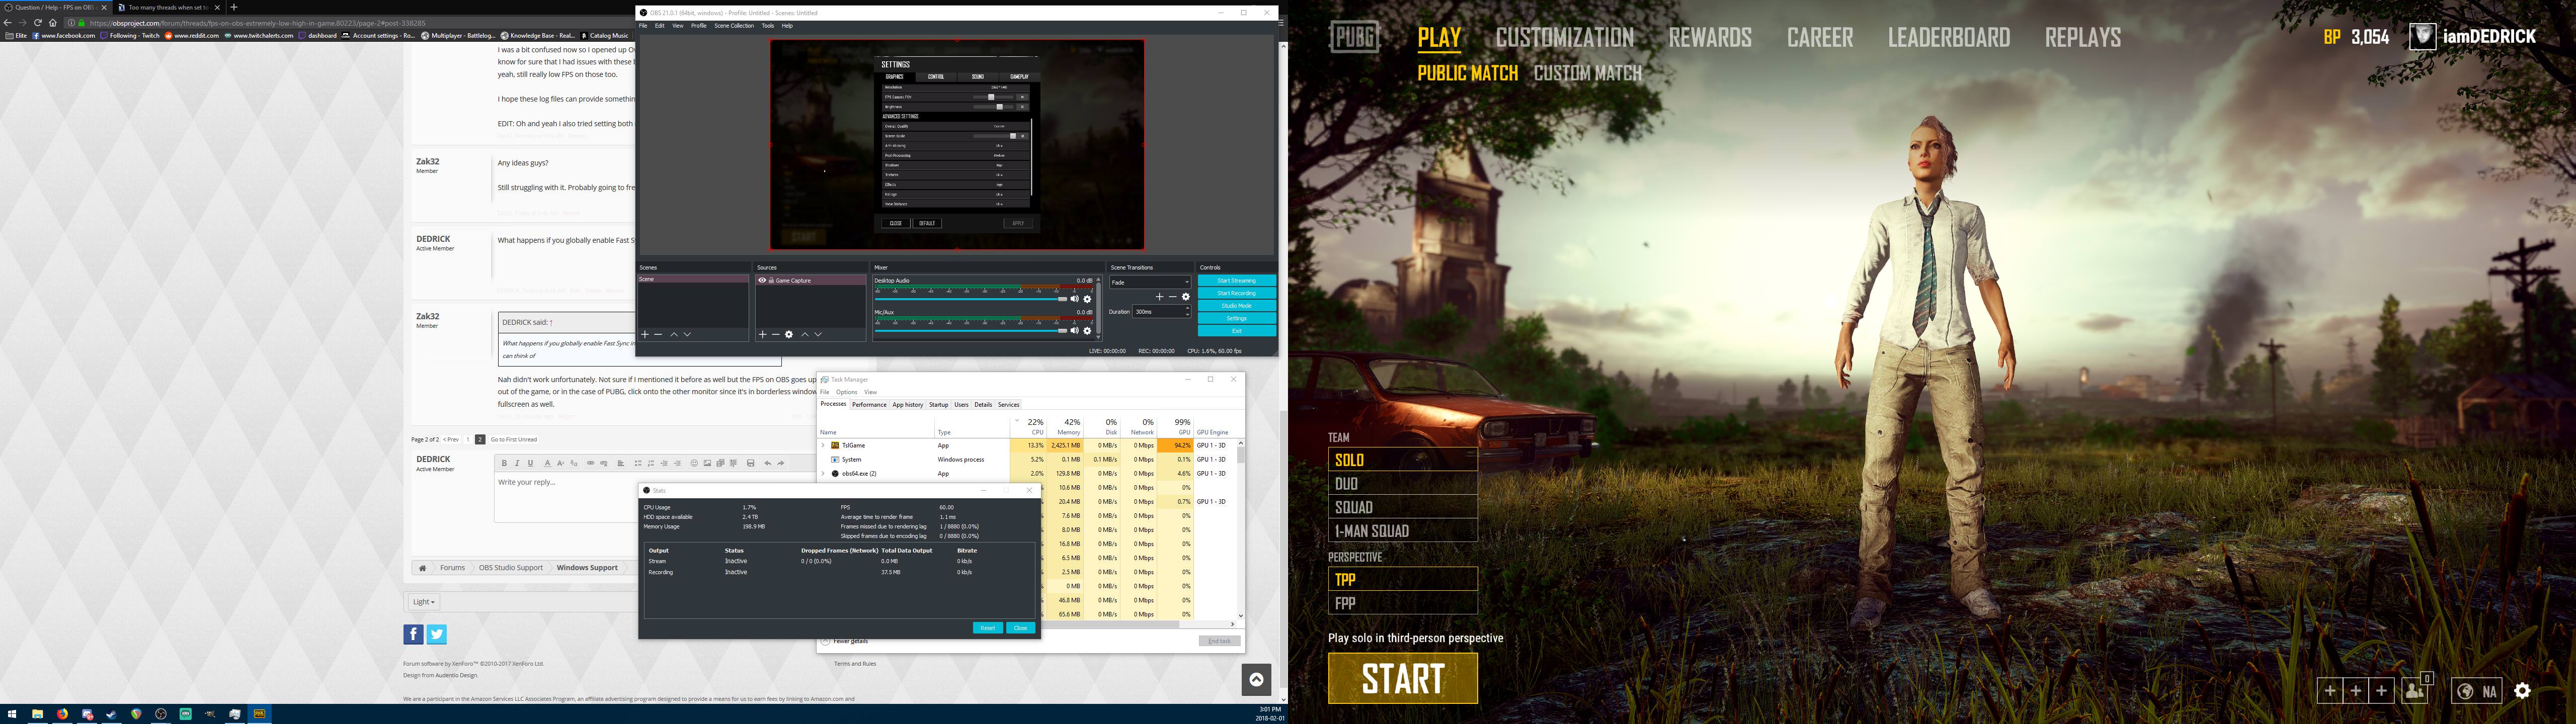 Obs low fps on stream